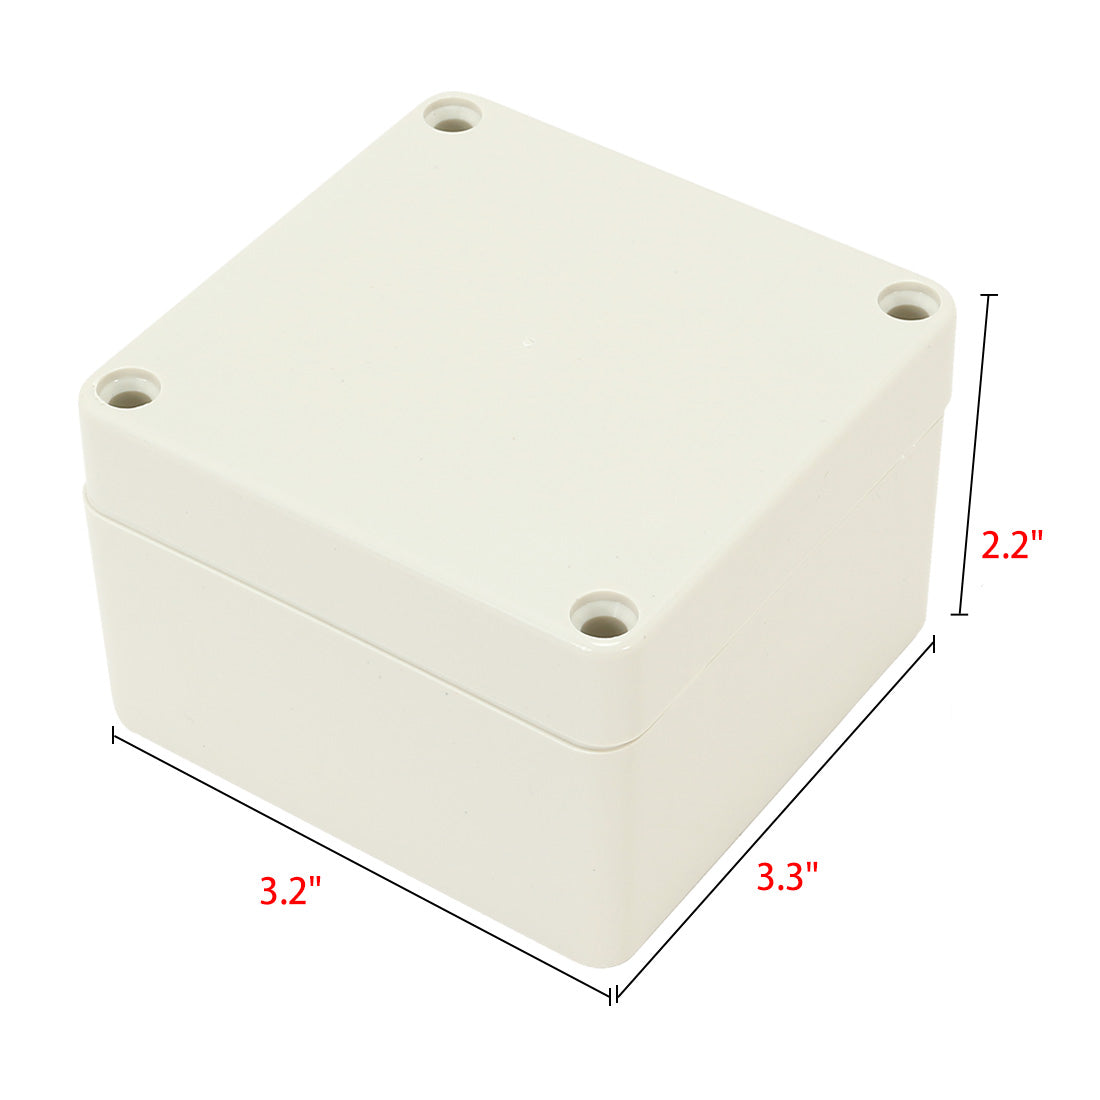 uxcell Uxcell 3.3"x3.2"x2.2"(83mmx81mmx56mm) ABS Junction Box Universal Electric Project Enclosure